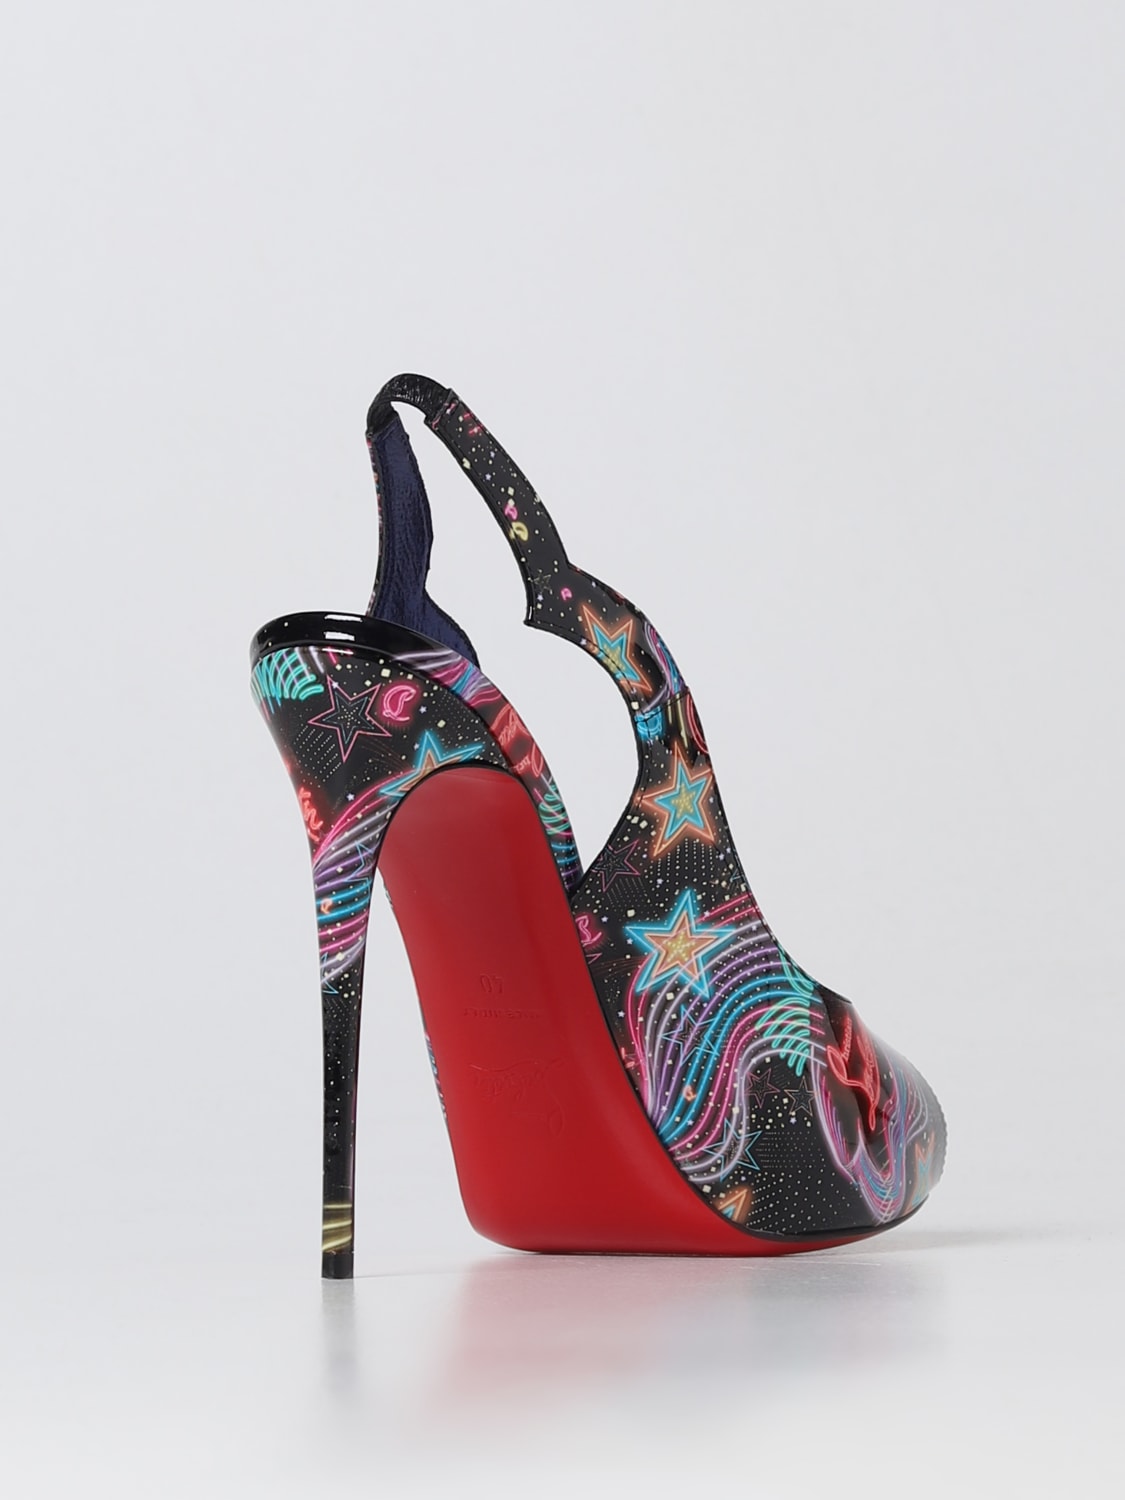 Hot Chick Christian Louboutin patent leather pumps